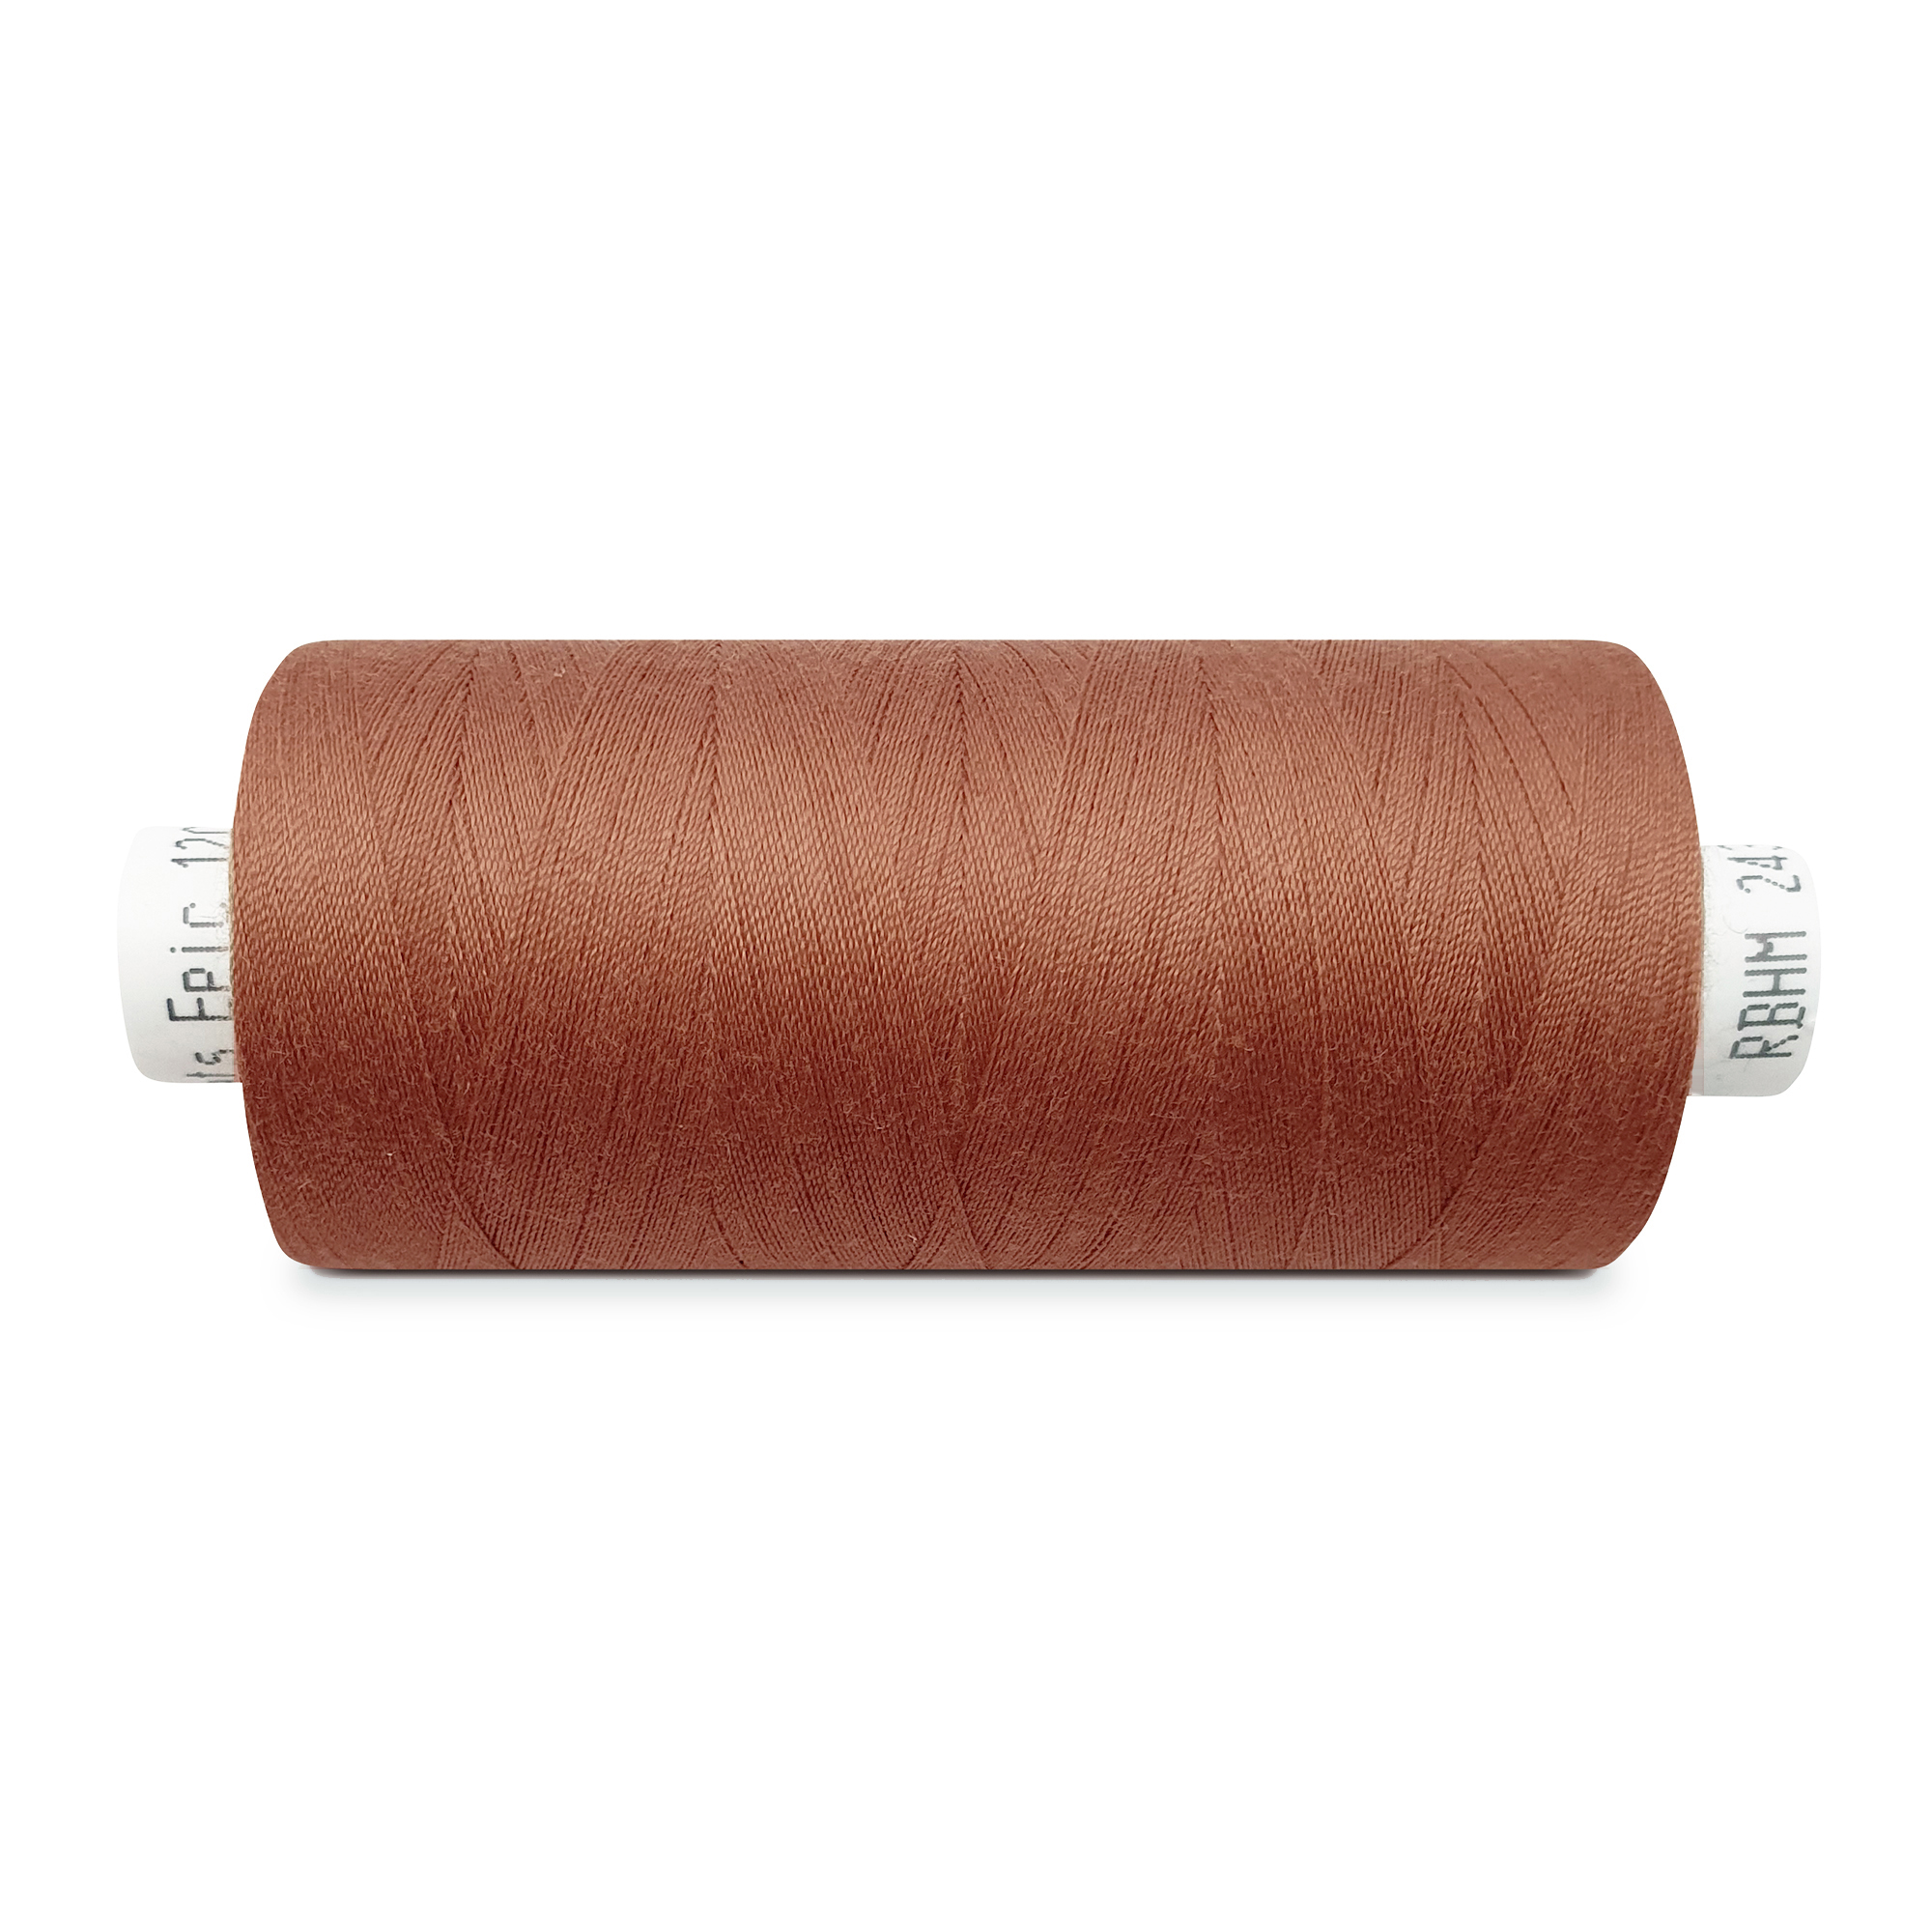 Jeans/Sewing thread fawn brown